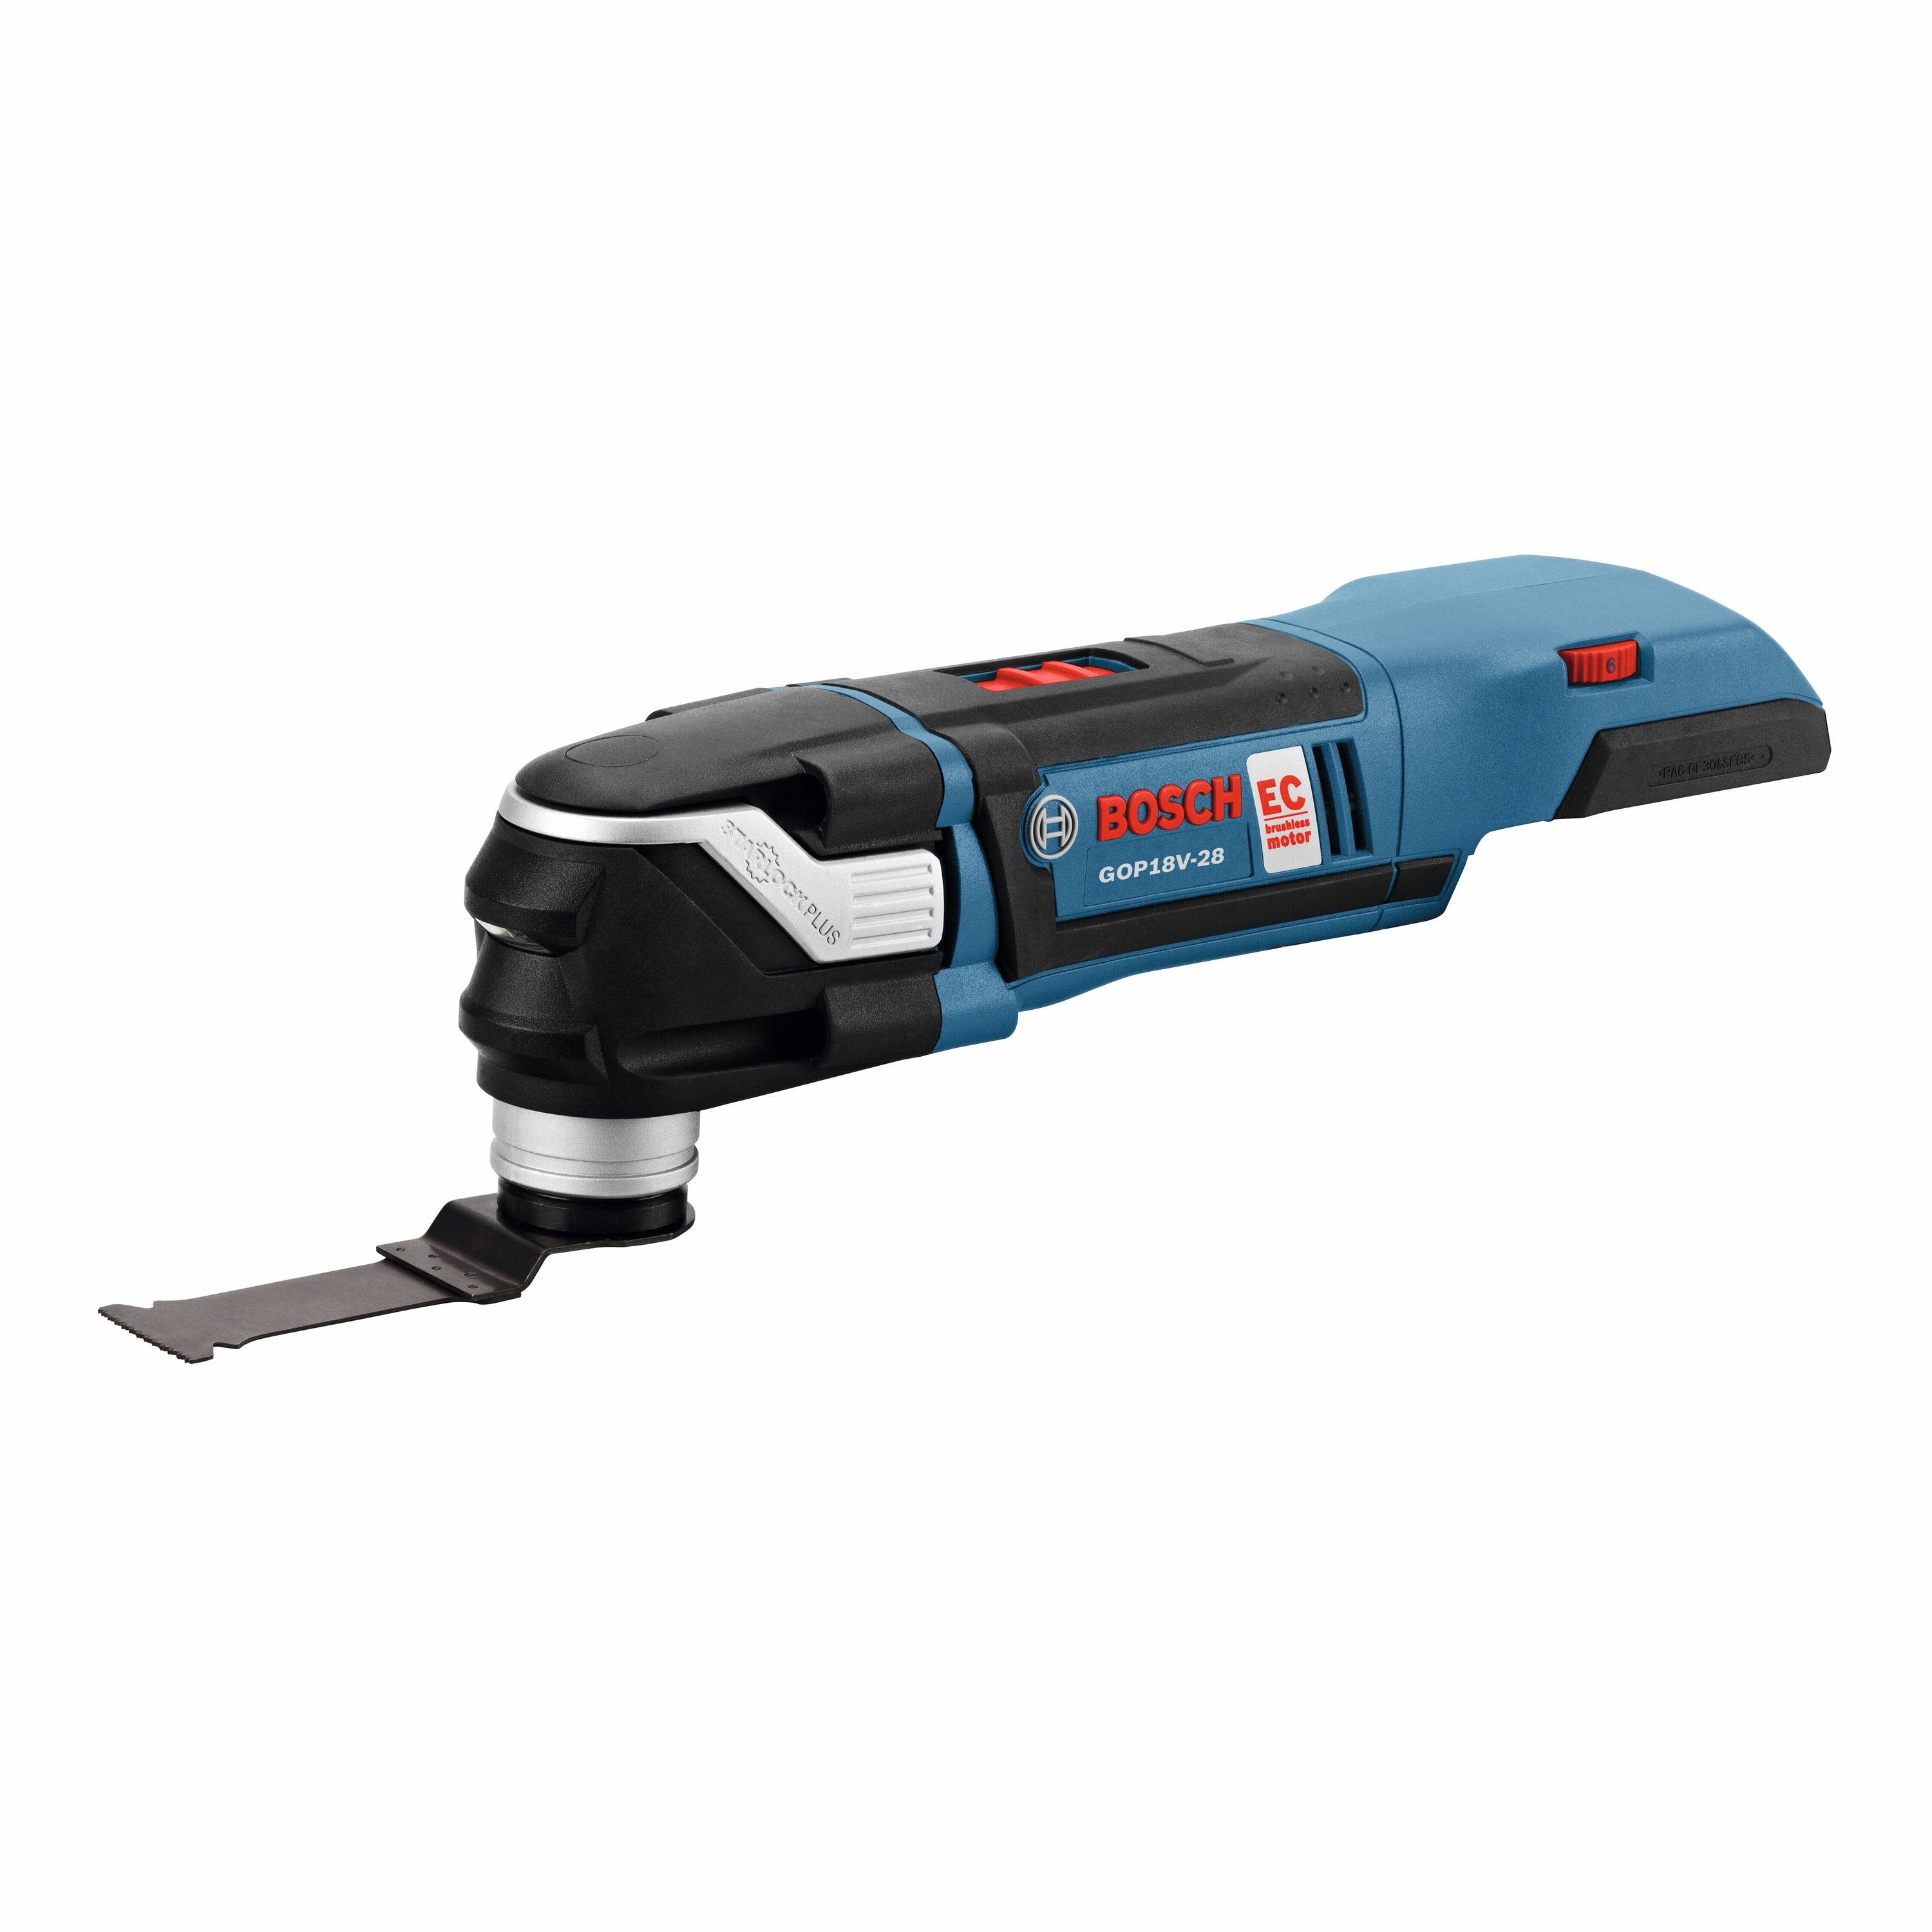 Bosch Starlock Plus 3-Piece Brushless-Amp 18-Volt Variable Speed Oscillating Multi-Tool Kit with N/ANo Case) Case | GOP18V-28N